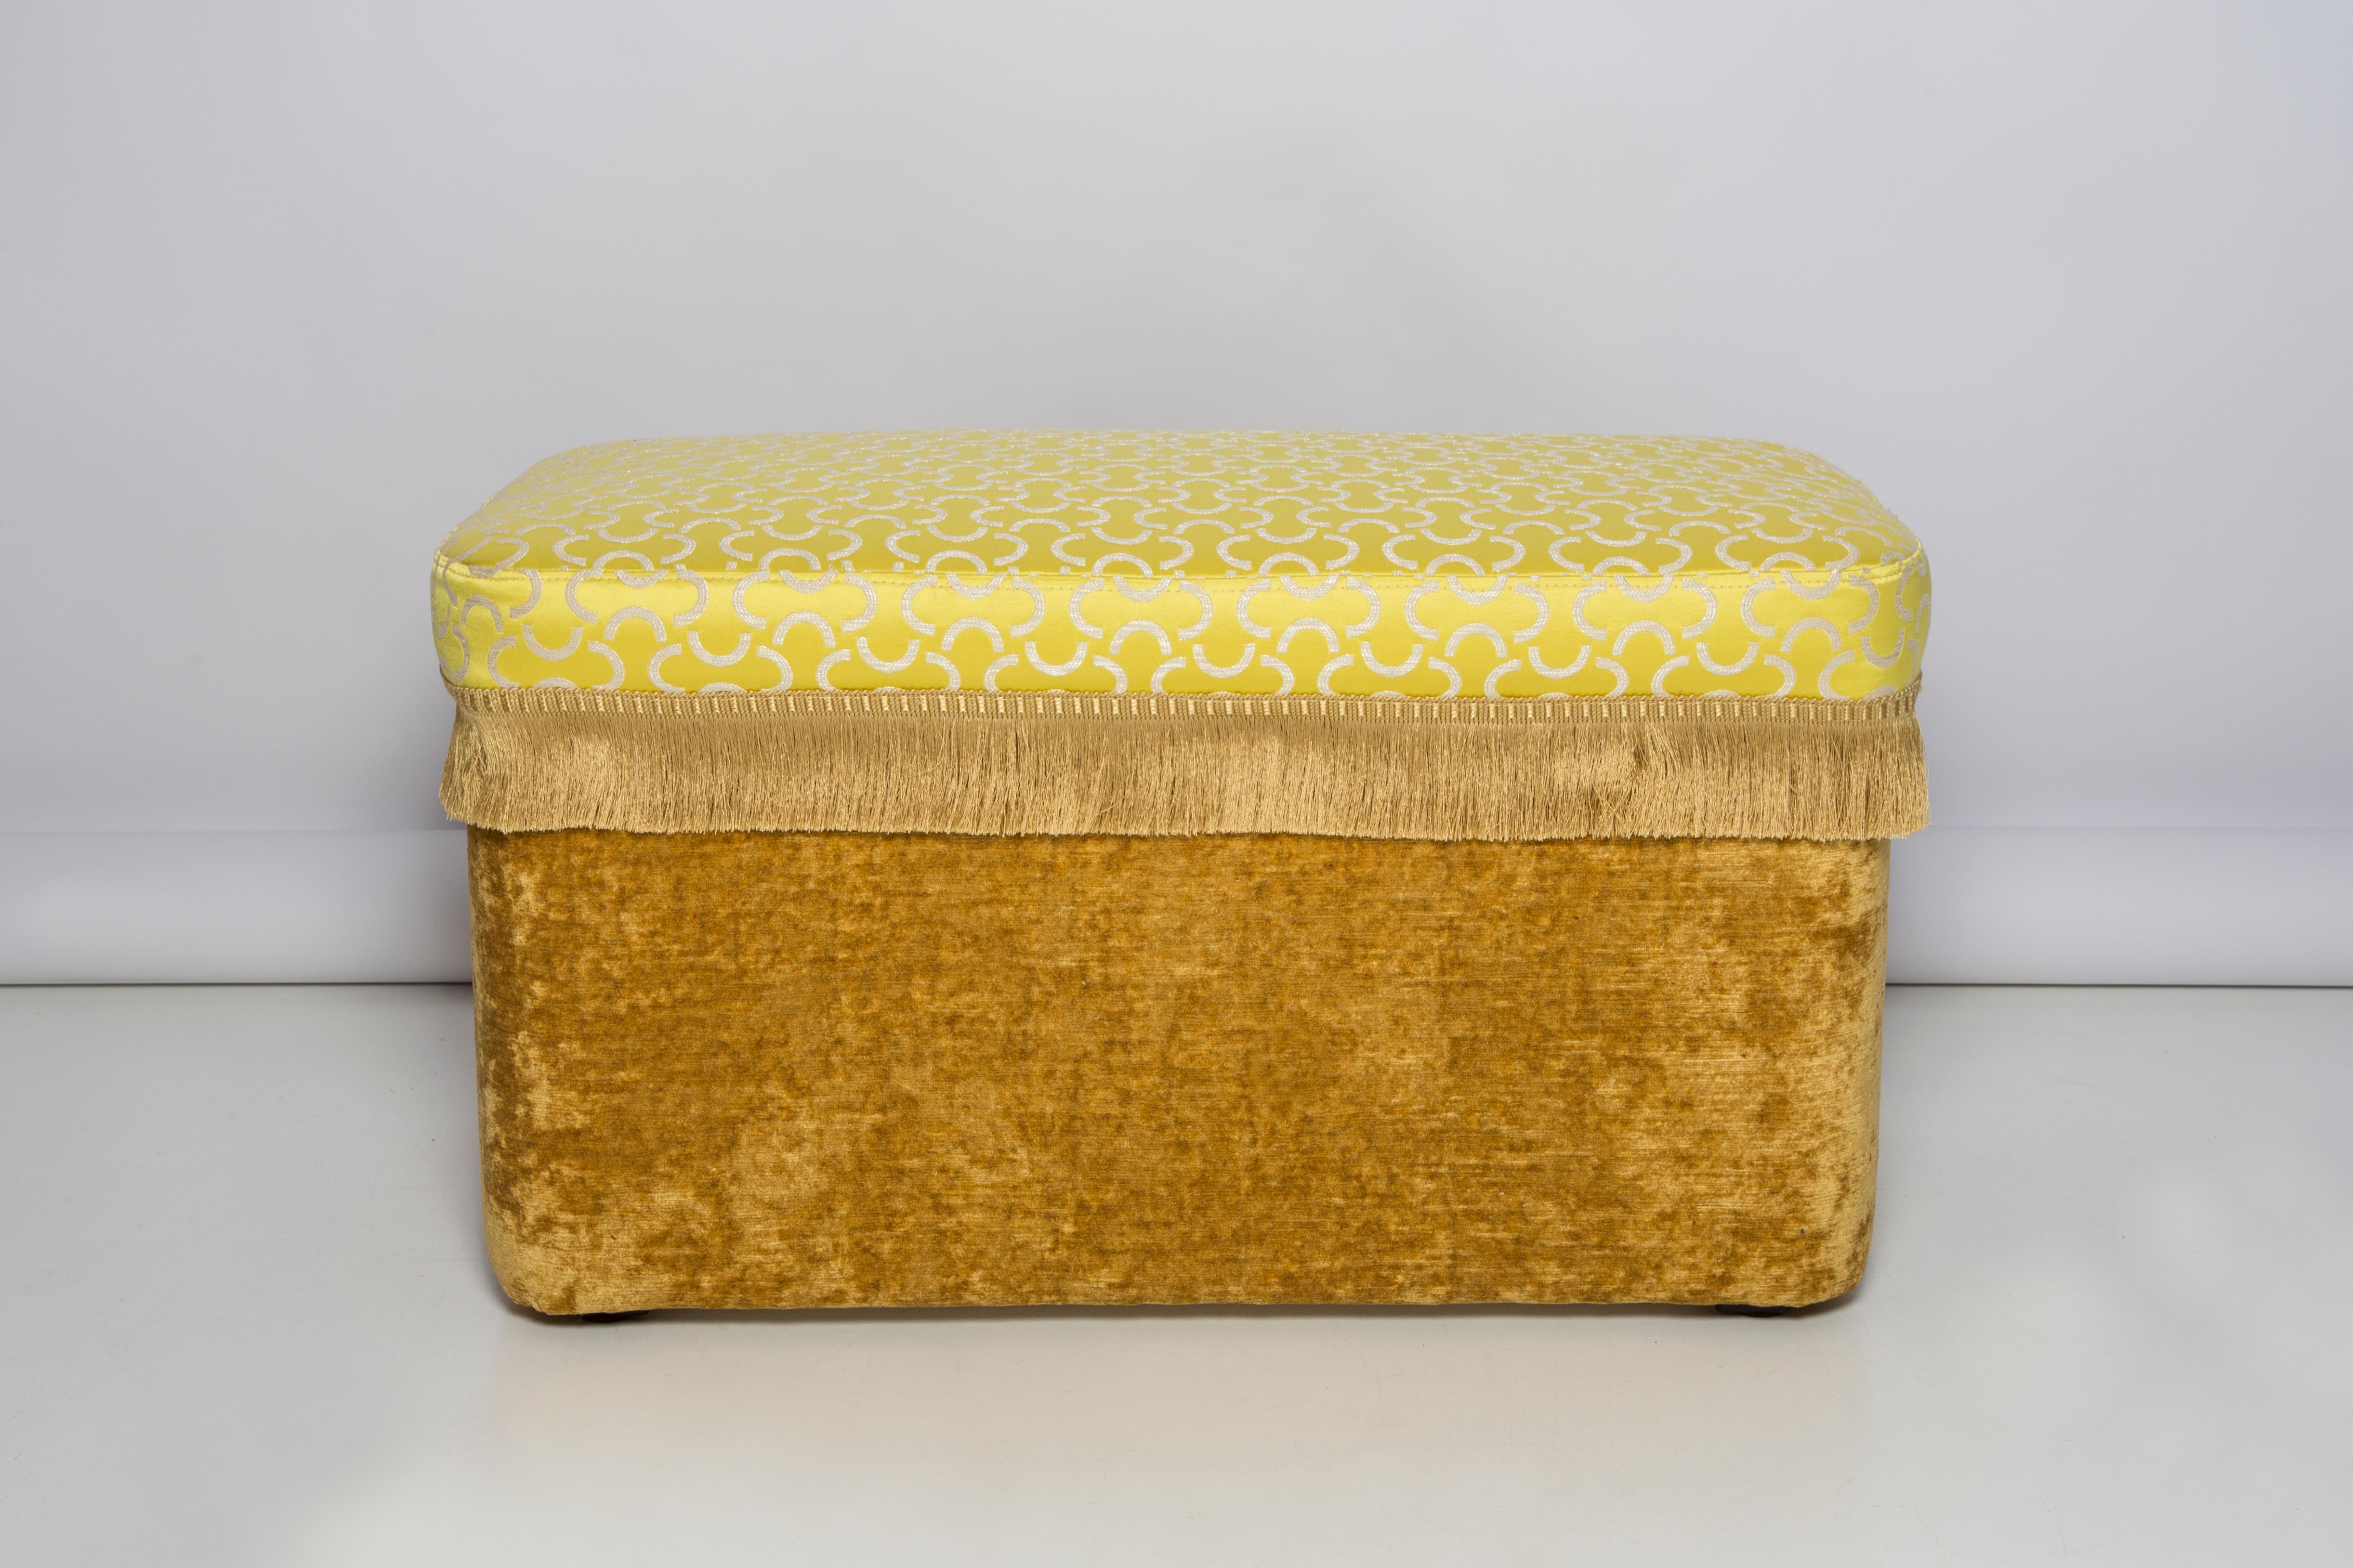 Contemporary Pouffe inspired of 1960s style. The pouffe consist of an upholstered part, a seat and box under the seat, characteristic of the 1960s style.

Bench was designed by Vintola Studio, a Polish brand created by Ola Szewczul, designer of